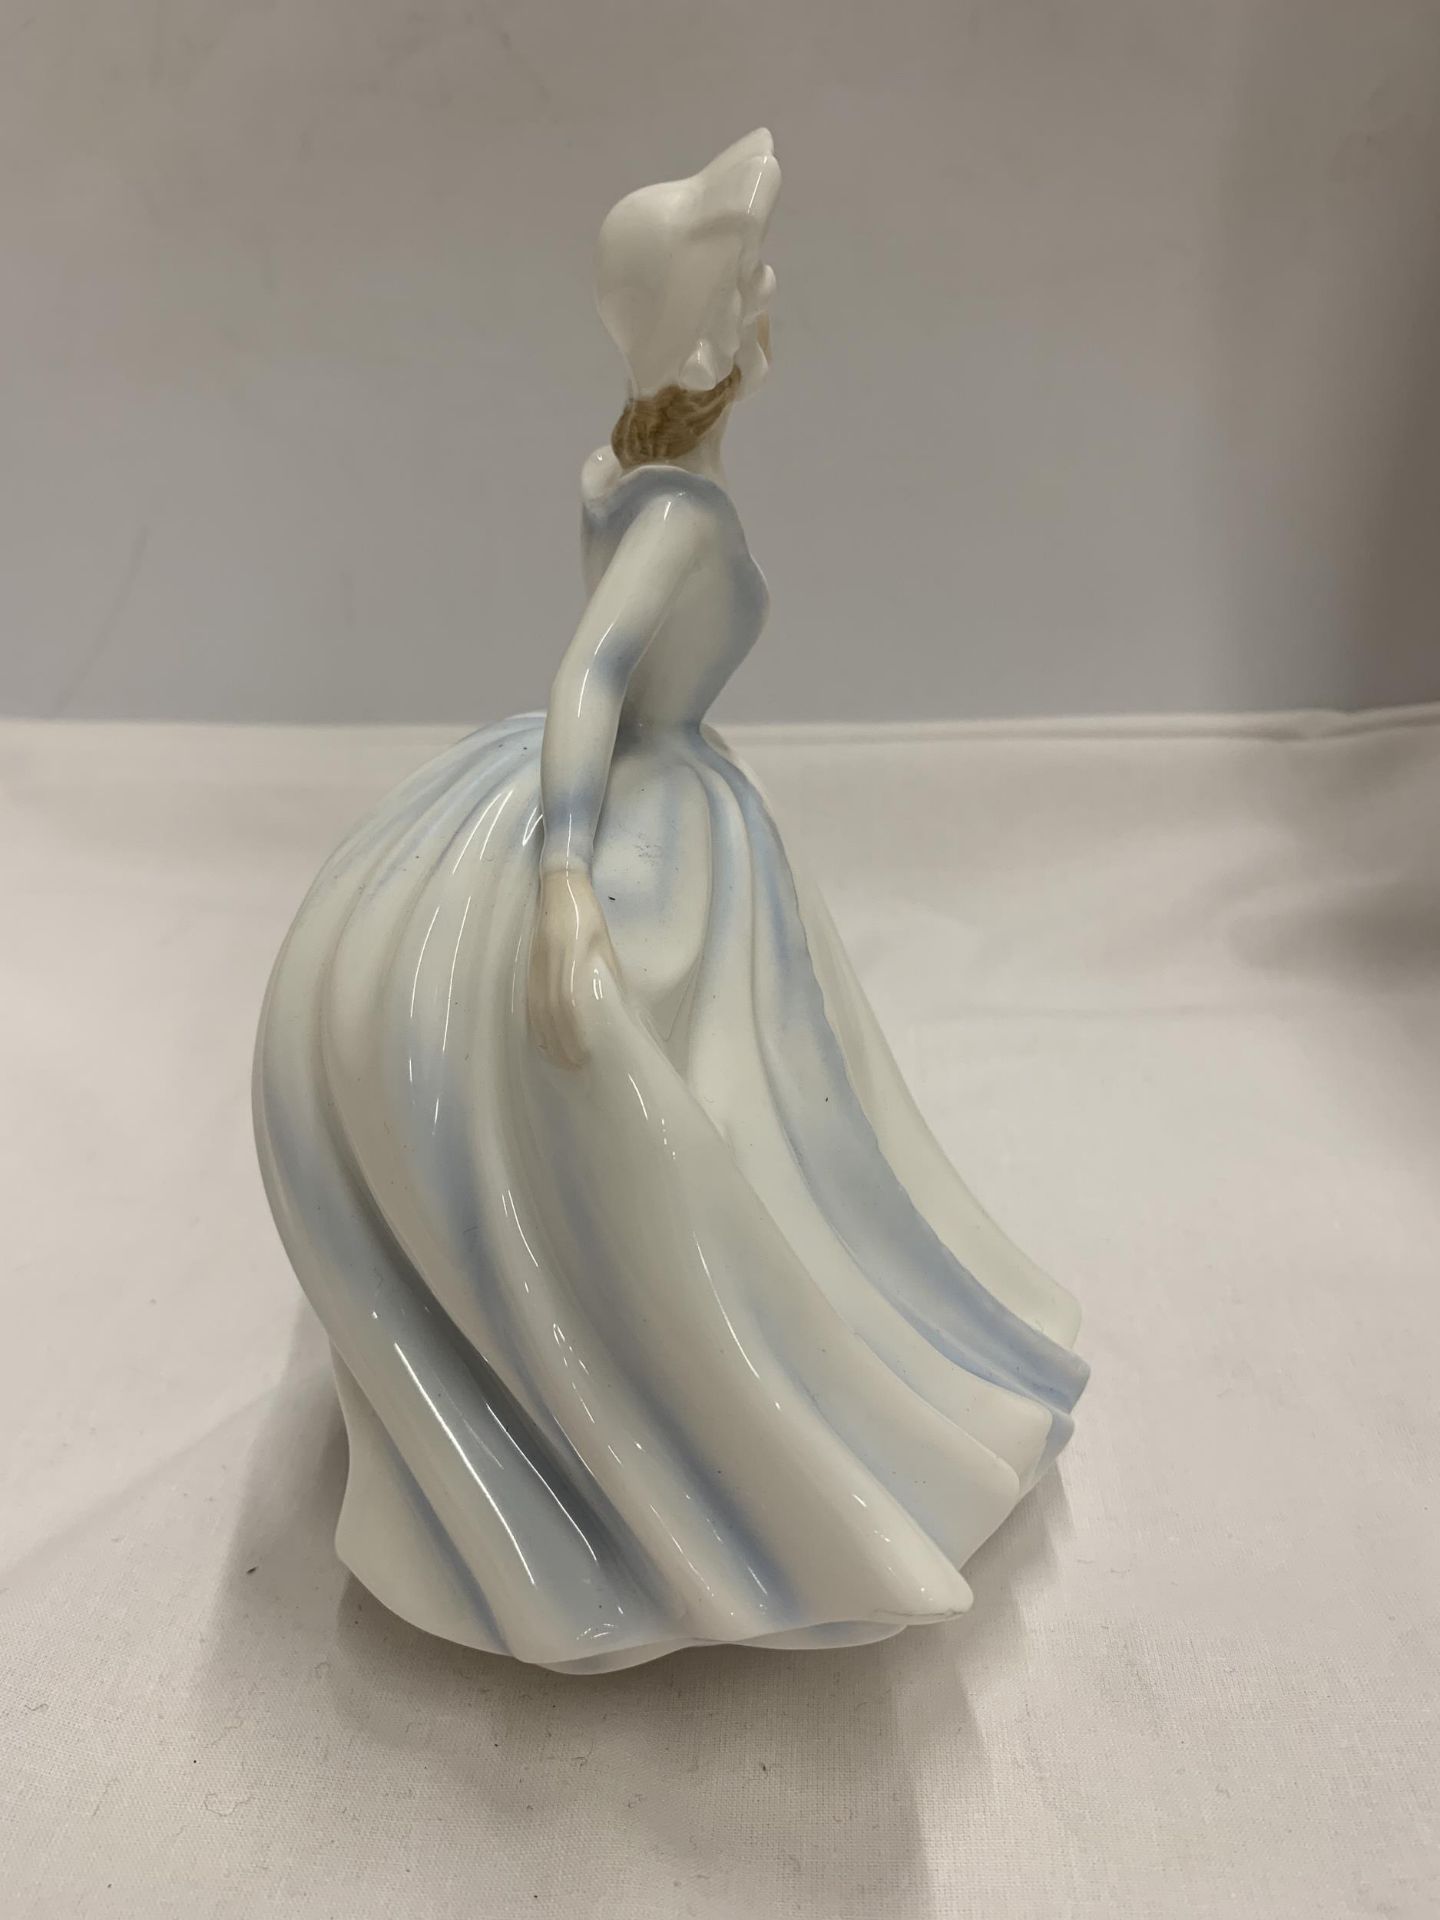 A ROYAL DOULTON LADY FIGURE IN BLUE DRESS - Image 5 of 6